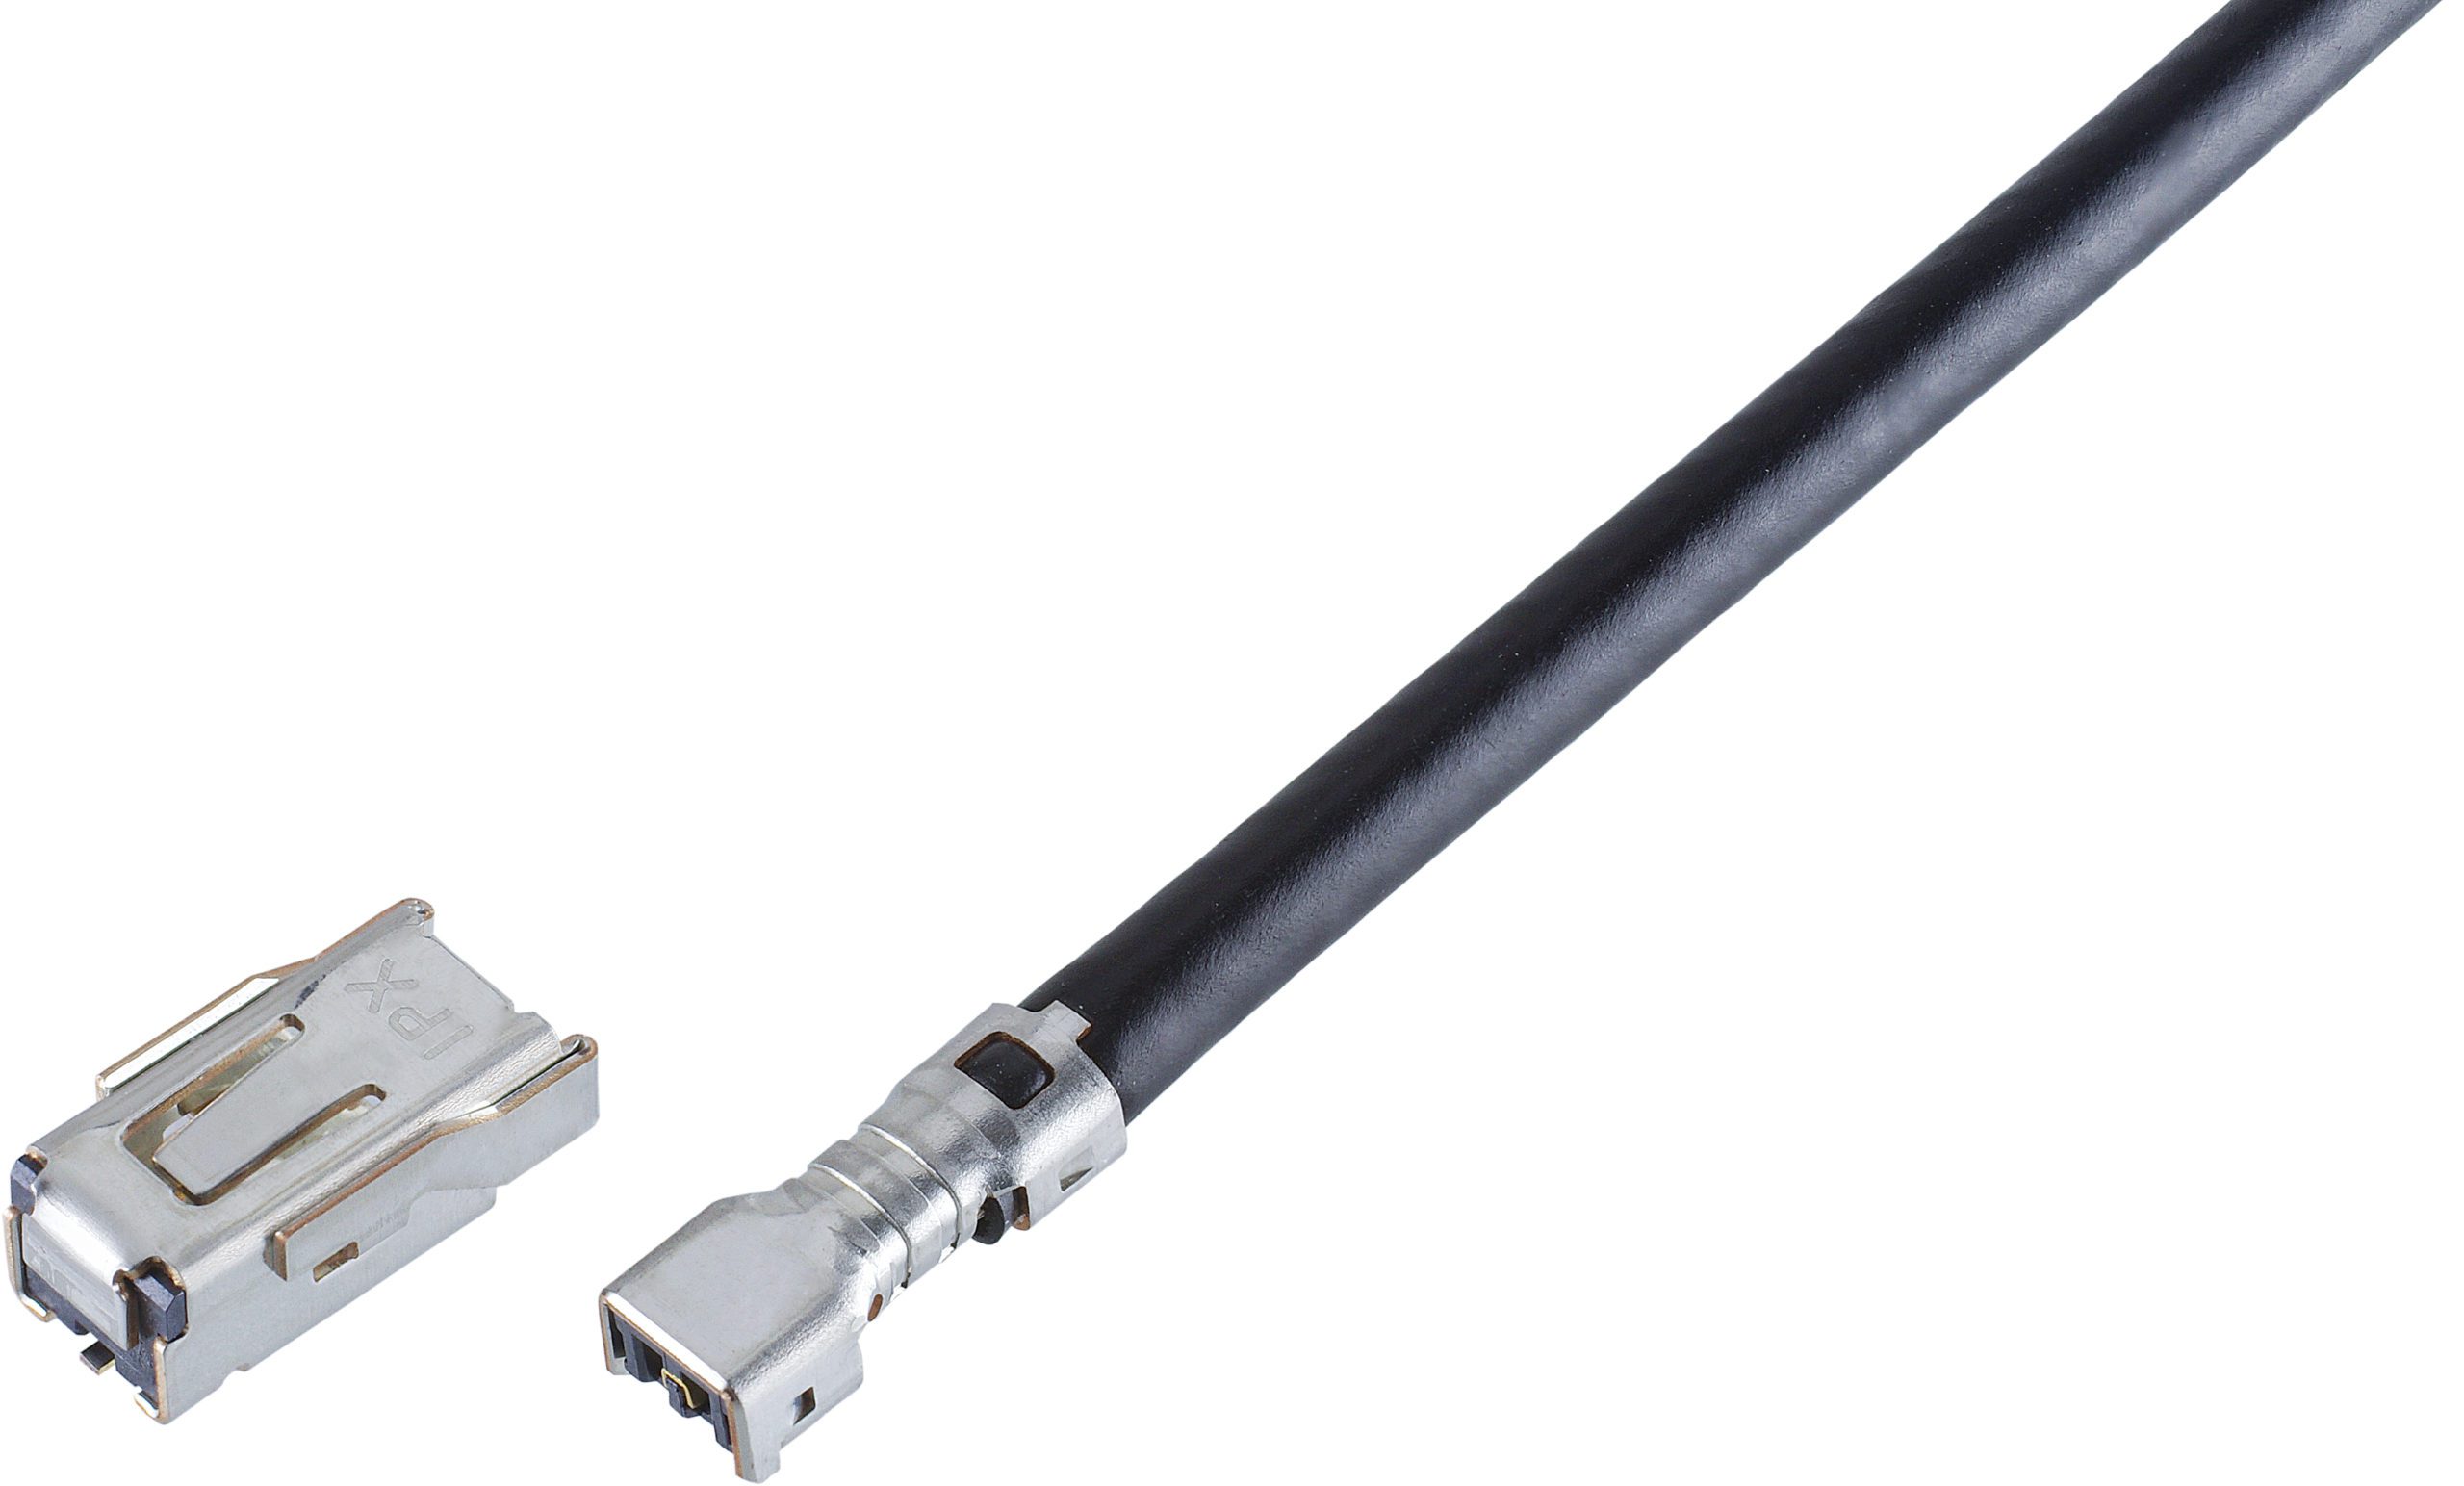 SMT connector for automotive telematics antenna from I-PEX